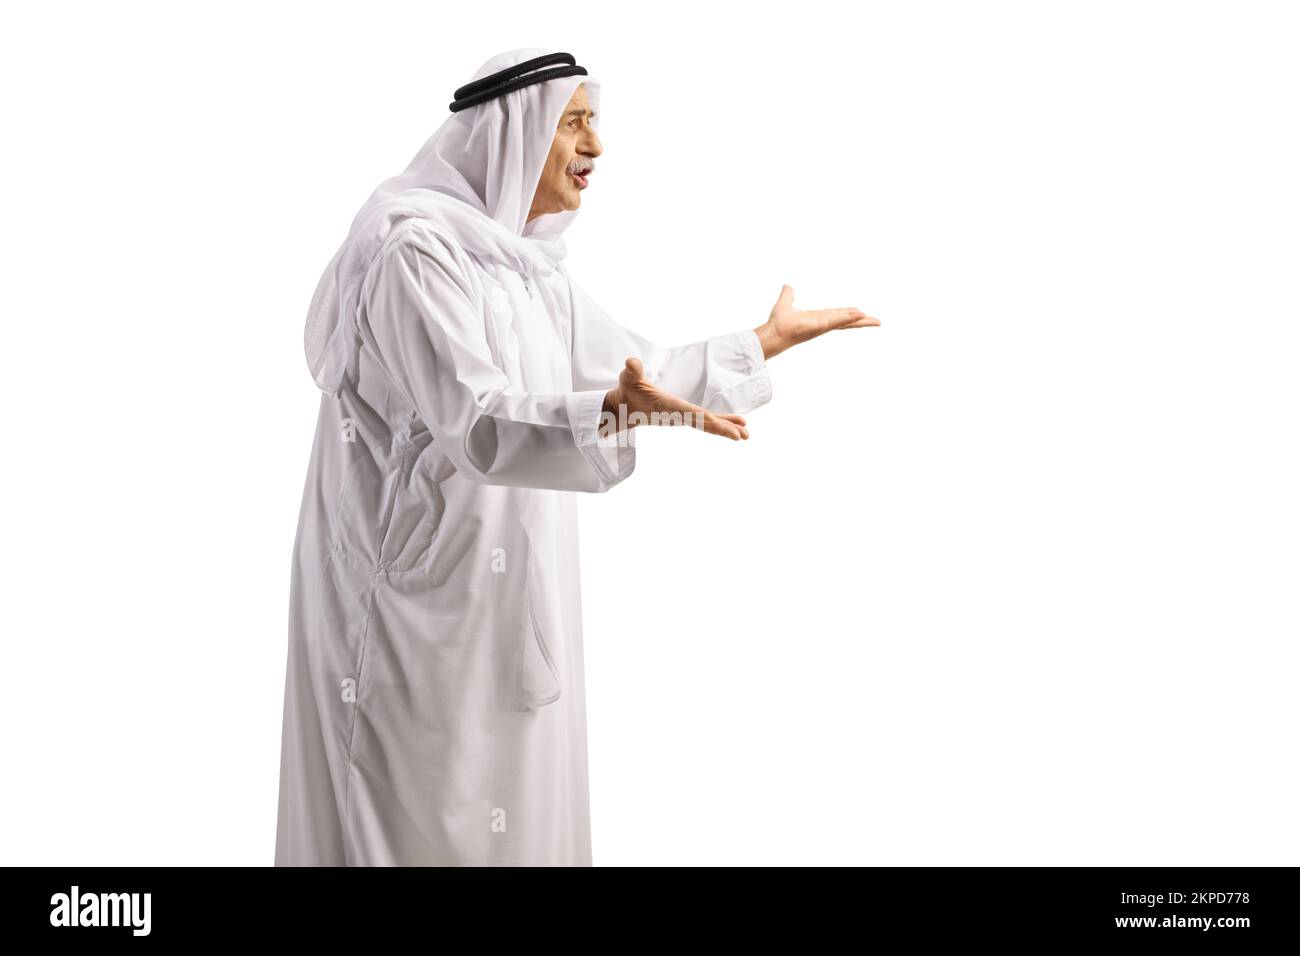 Full length profile shot of an angry mature arab man in a robe gesturing with hands isolated on white background Stock Photo